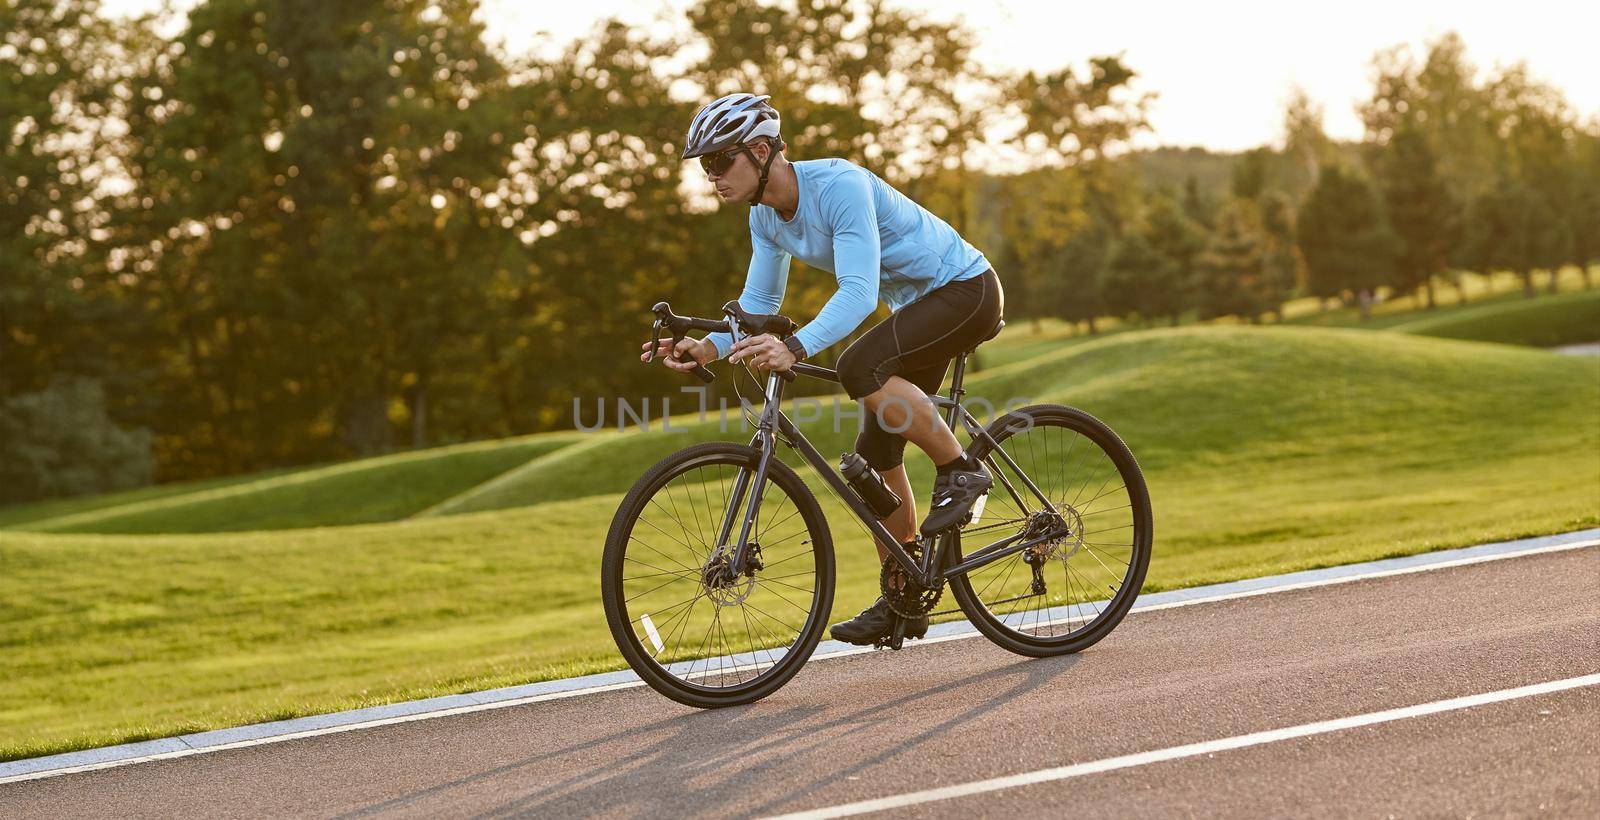 Professional bicycle racer in action. Side view of a young athletic man in sportswear riding mountain road bike at sunset. Healthy active lifestyle and sport concept